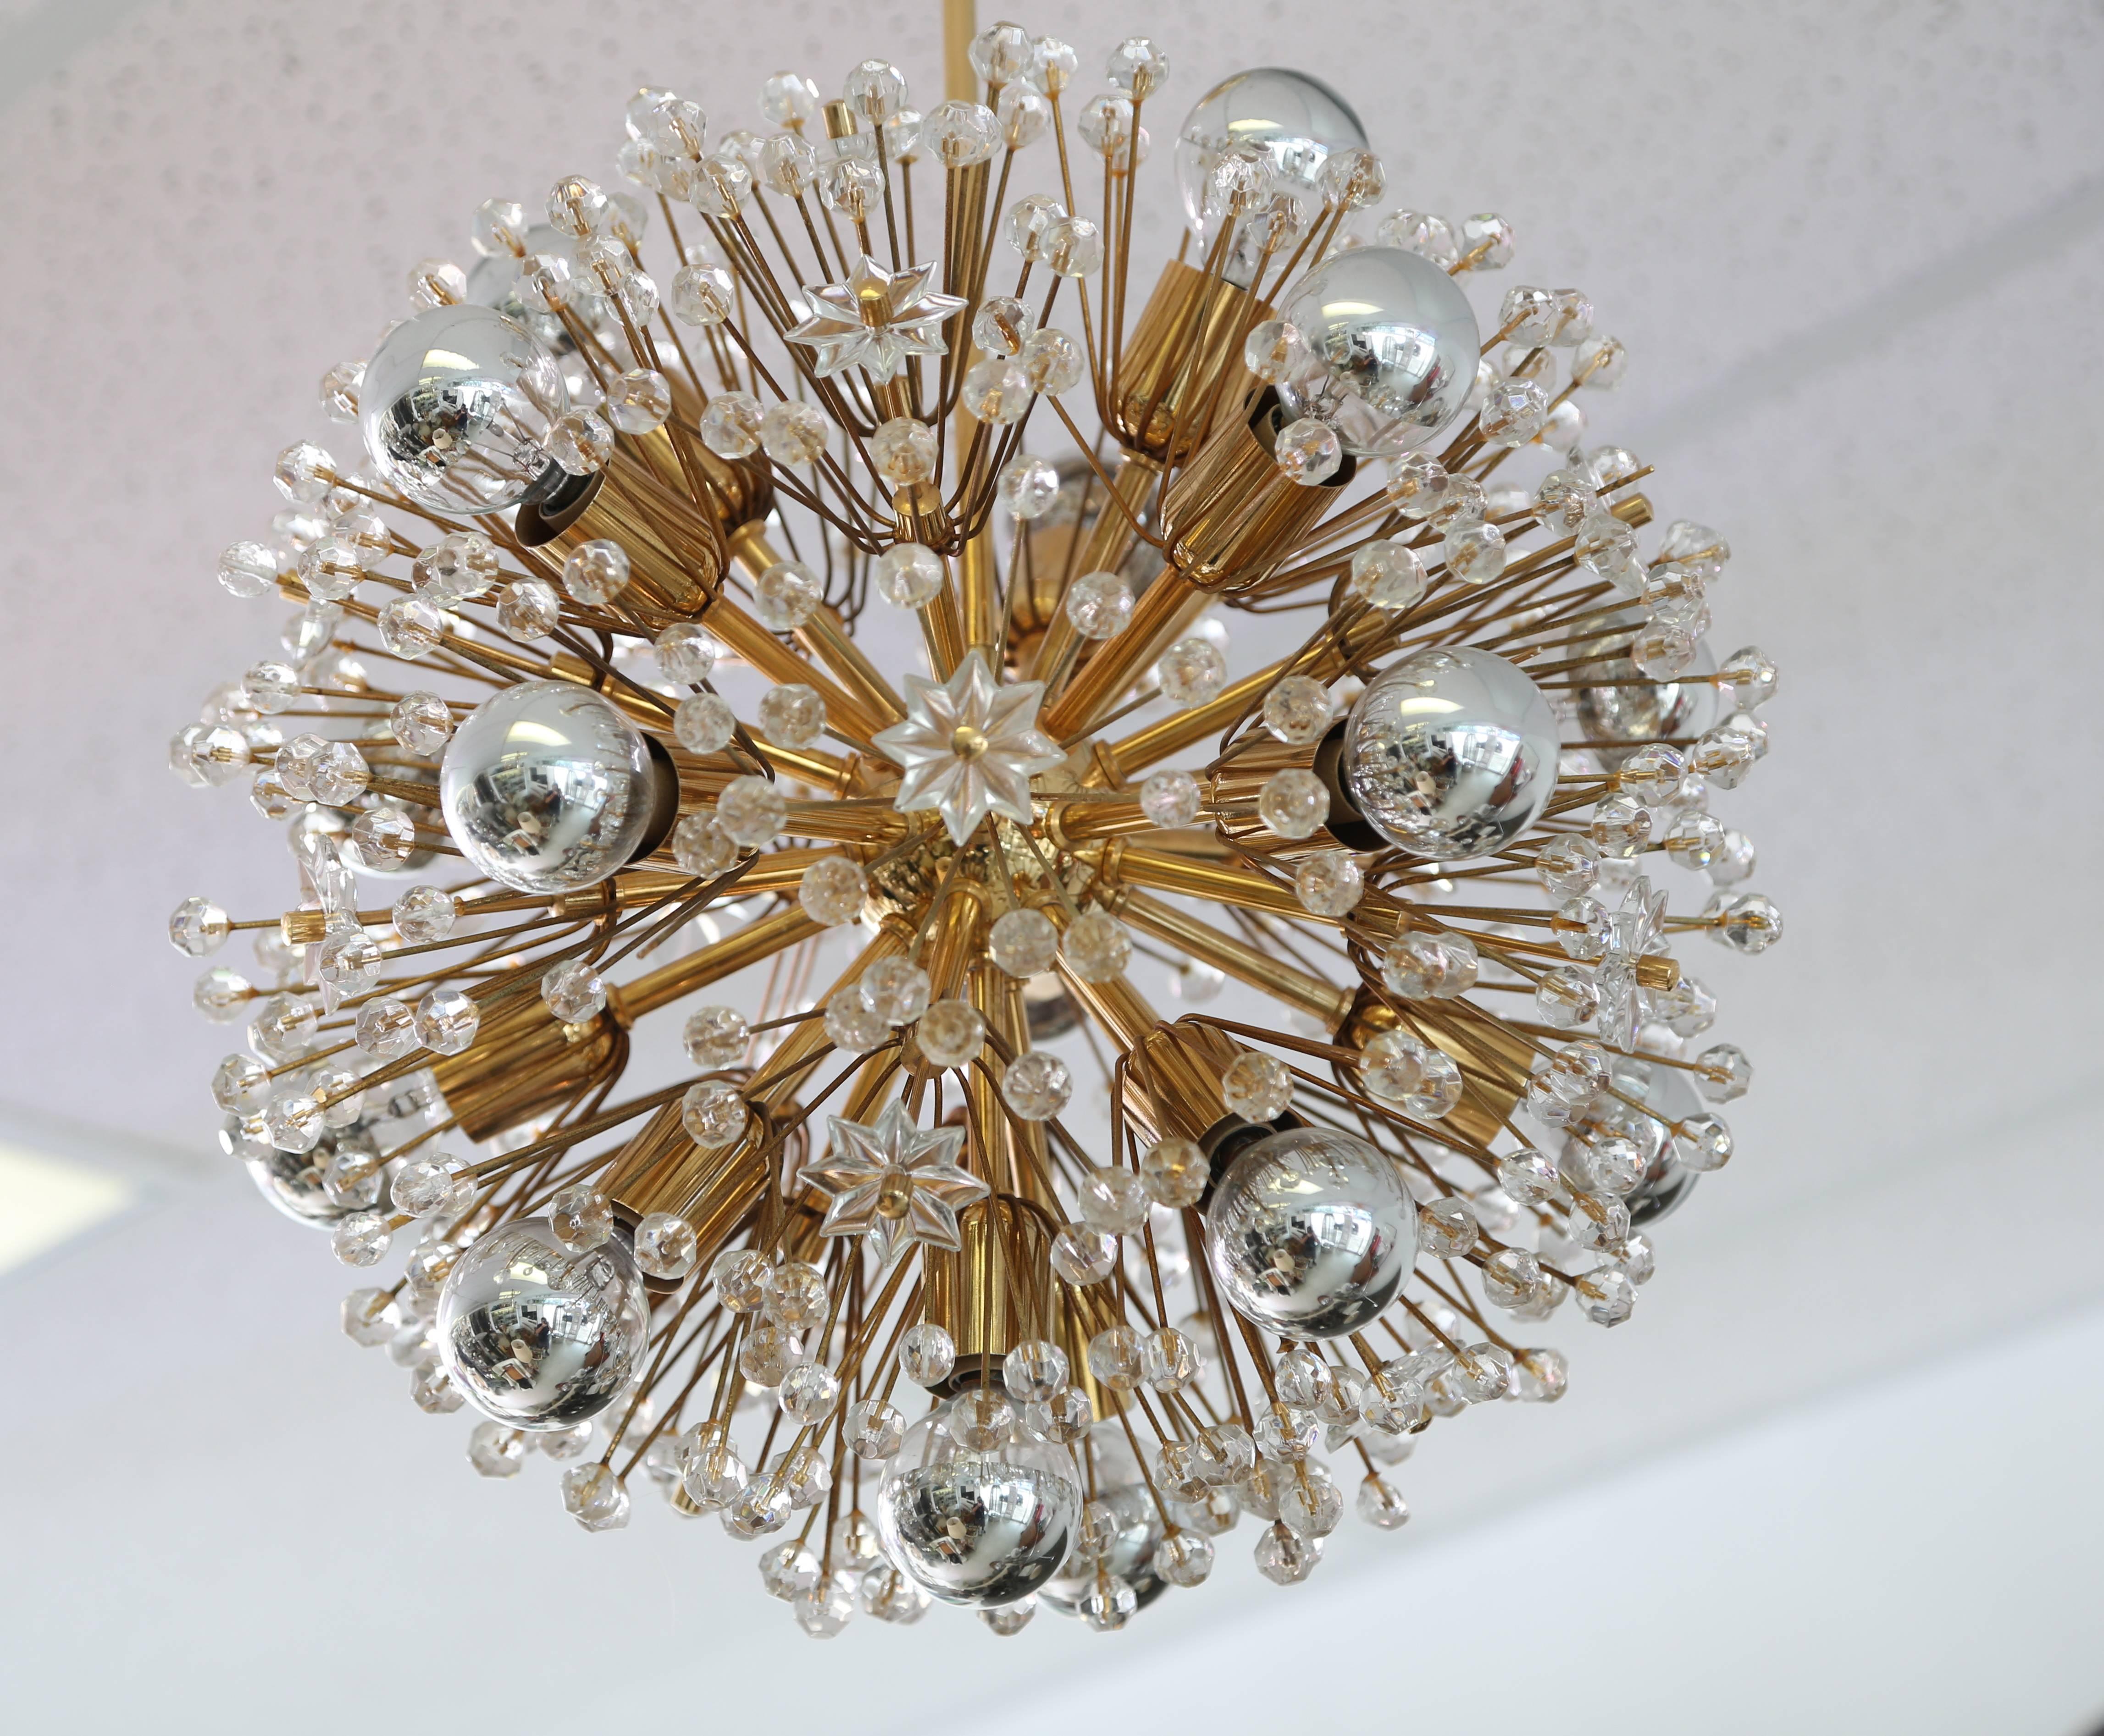 An beautiful fixture manufactured by Rupert Nikoll in Vienna, circa 1950
Re-wired.